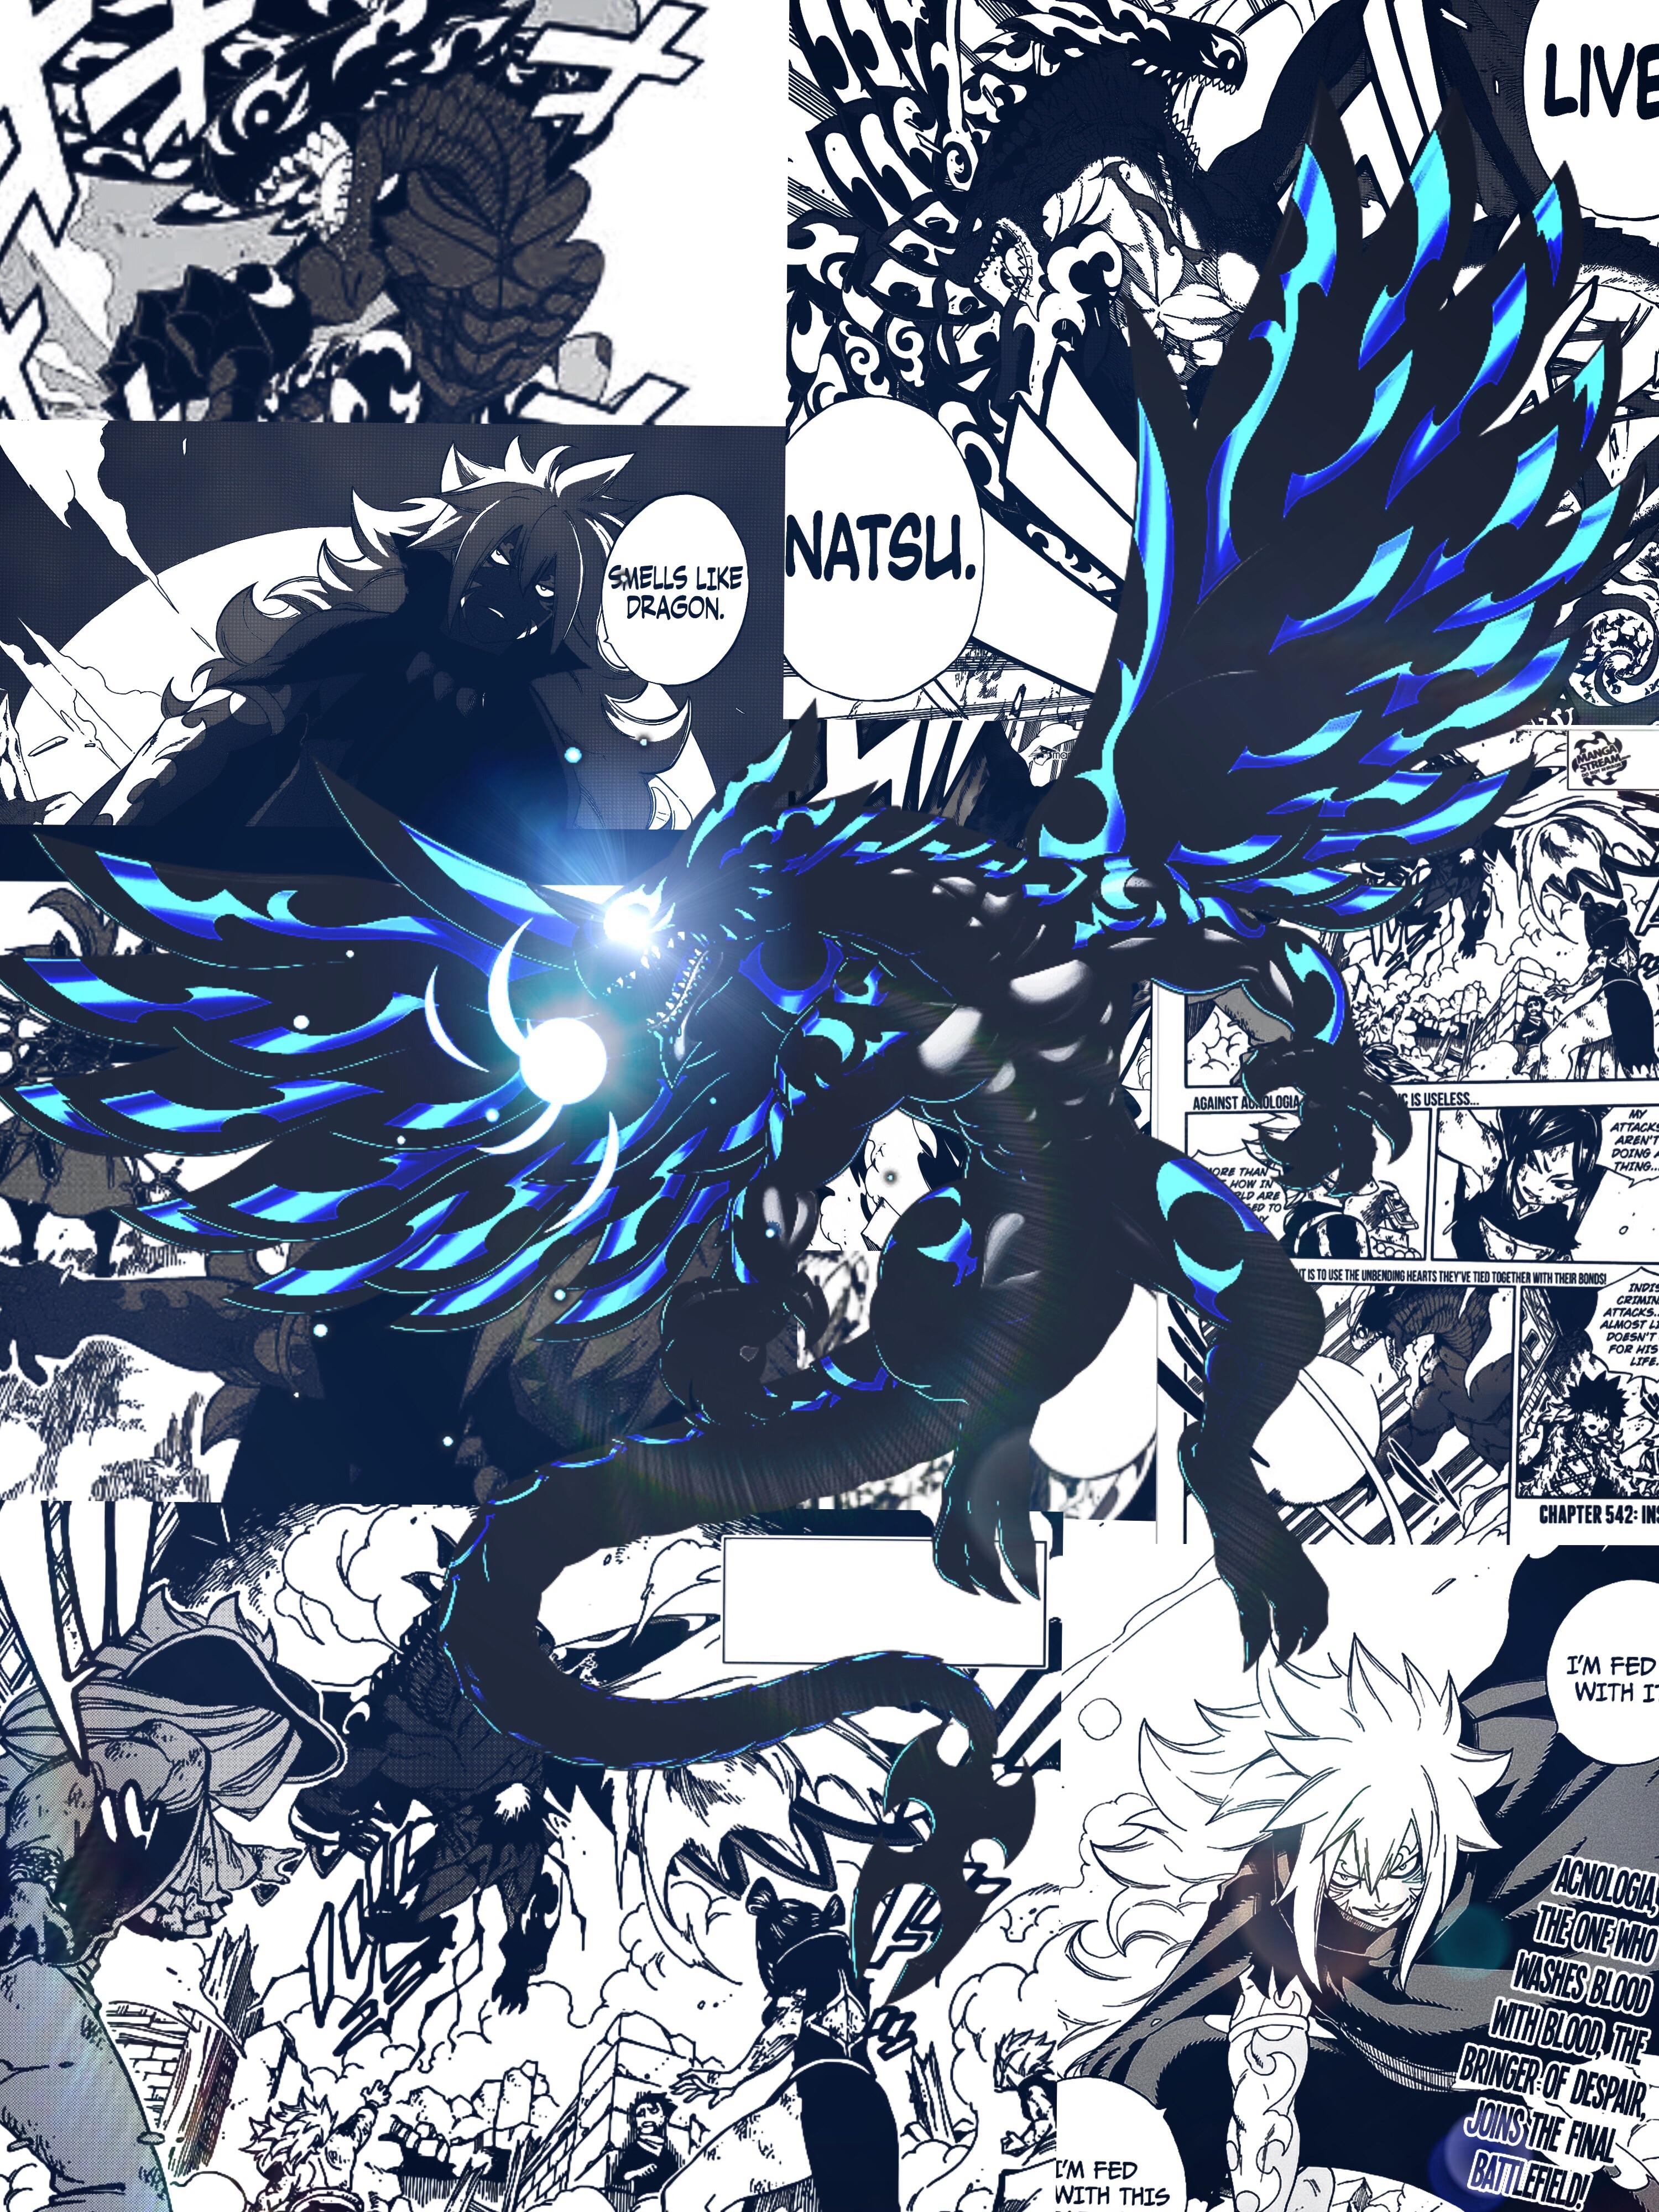 The king dragon Acnologia Lucy  Fairy tail wallpaper  Facebook